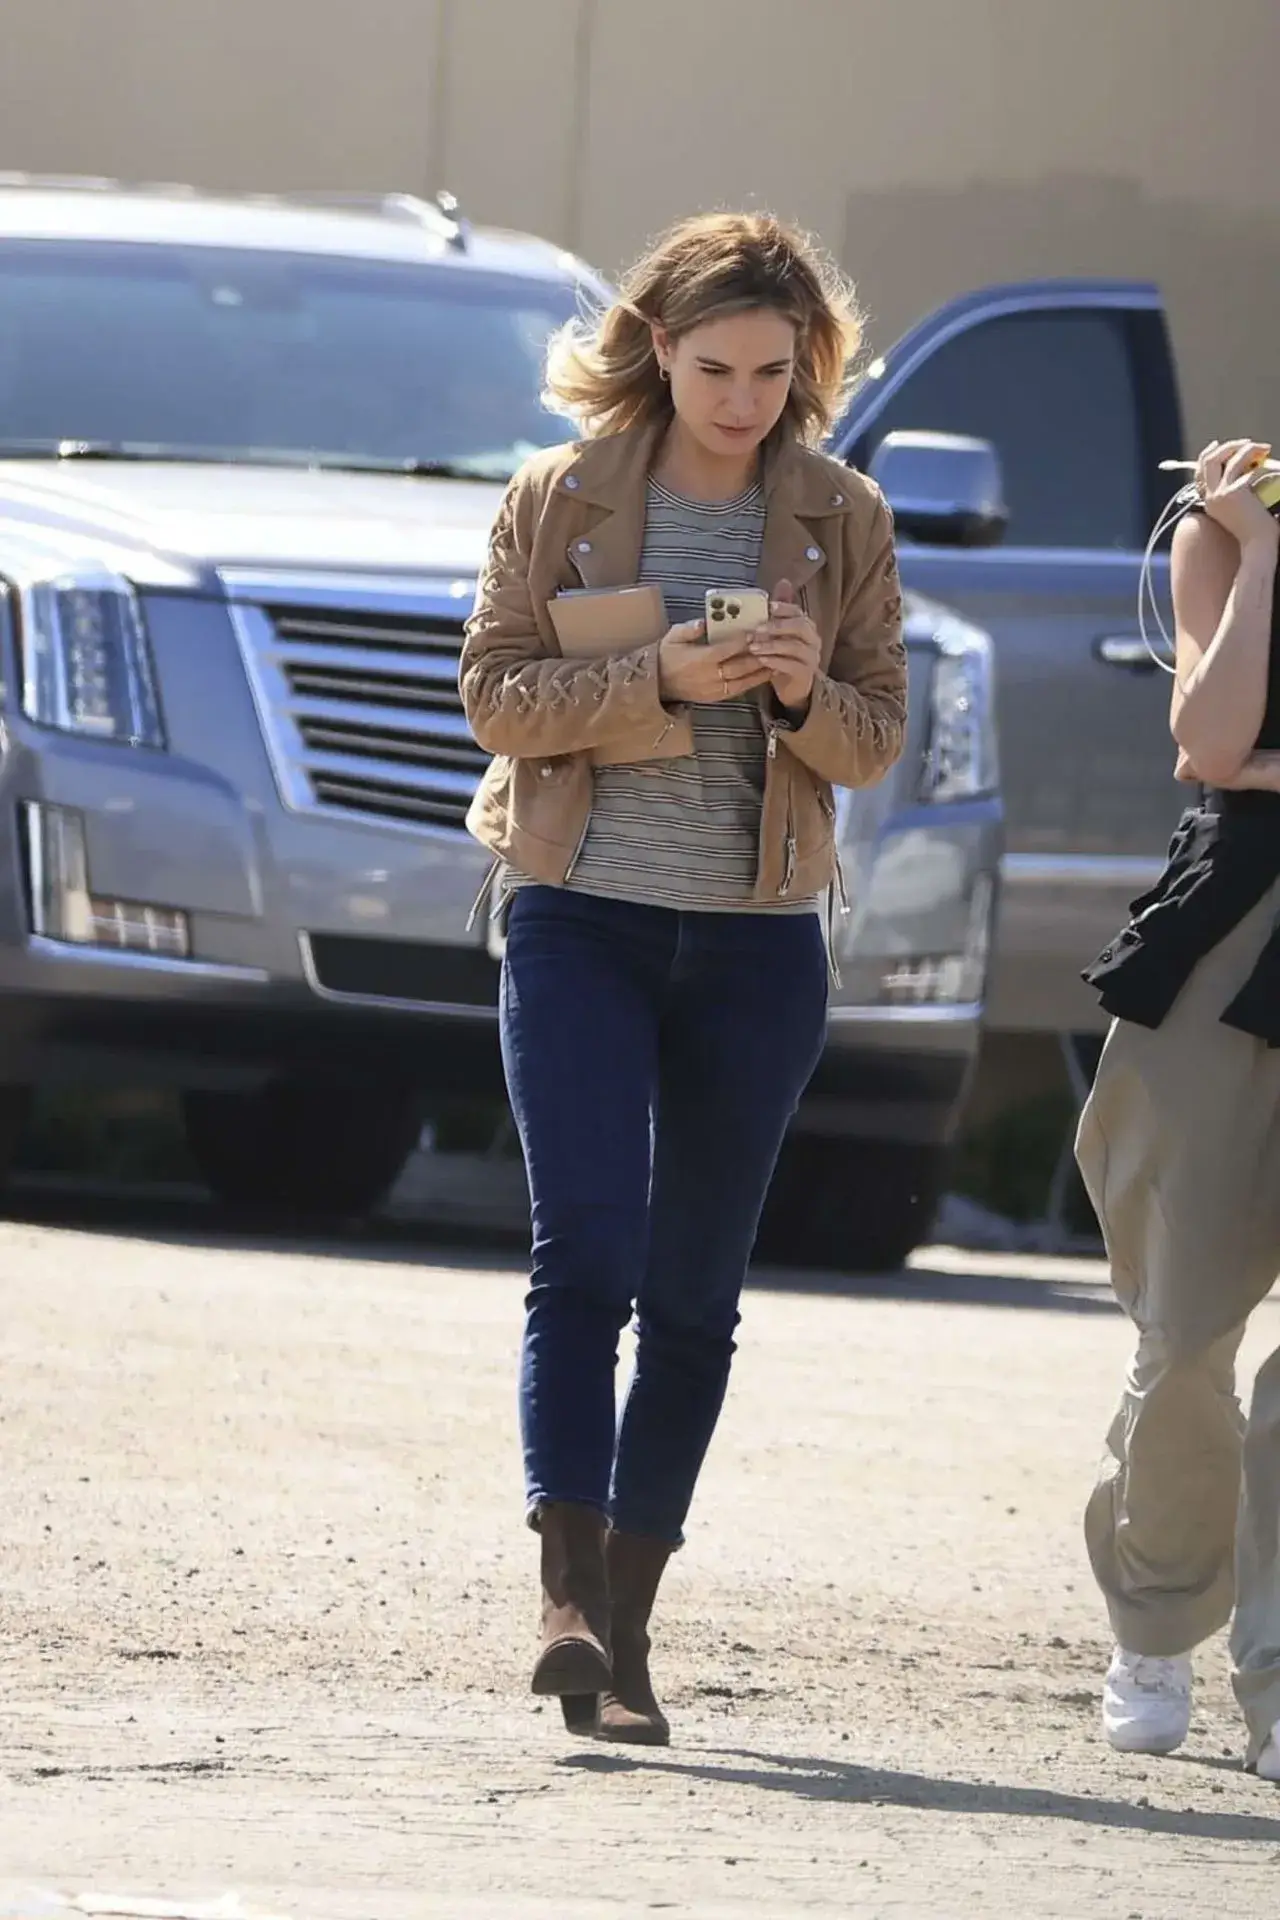 LILY JAMES STILLS ON SET IN LA CONTINUING HER WORK ON THE FILM SWIPED 1